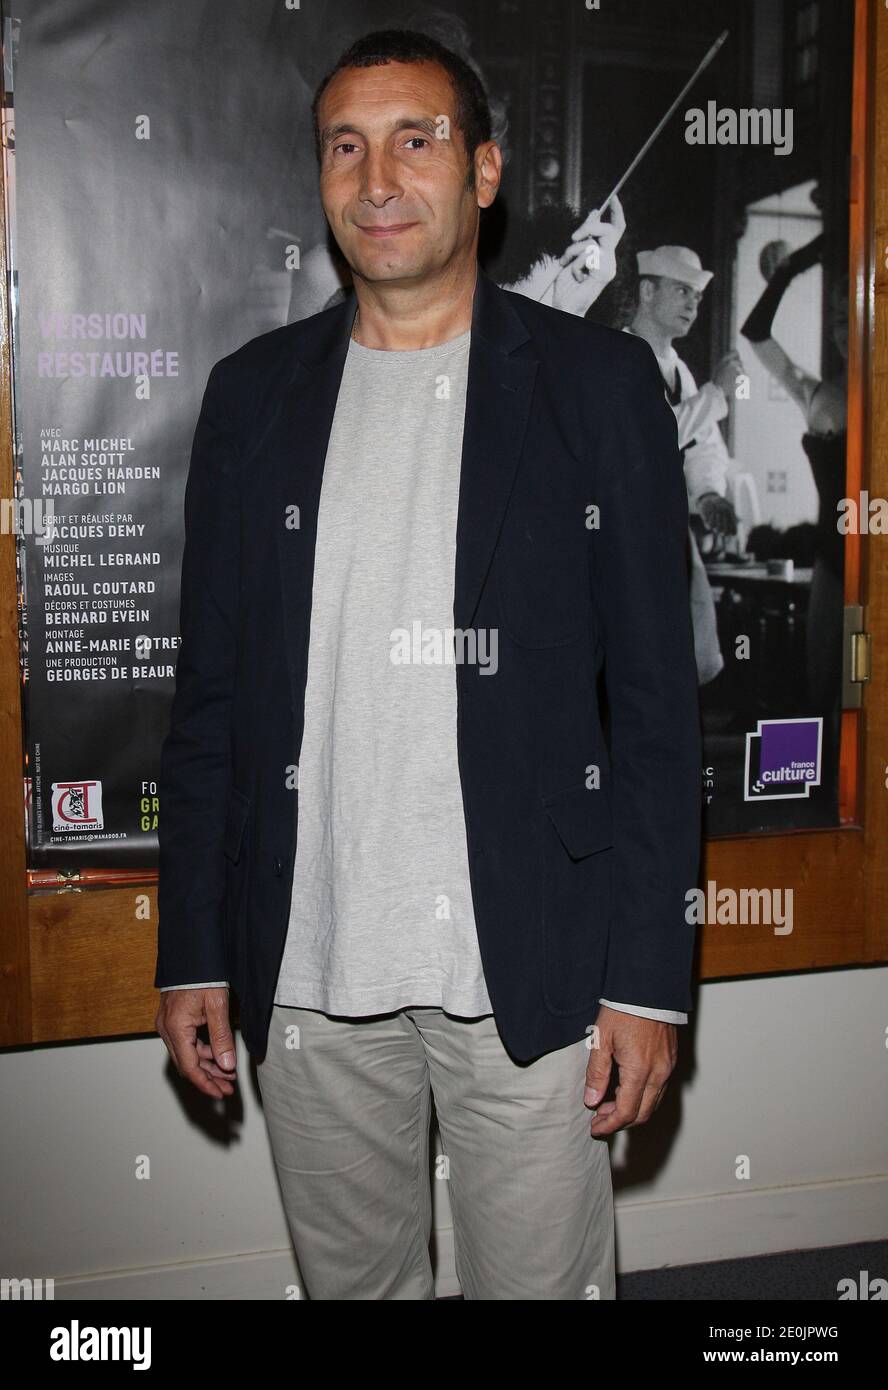 Zinedine Soualem attending the premiere of 'Lola' held at the Cinema L'Arlequin in Paris, France on July 10, 2012. Photo by Marco Vitchi/ABACAPRESS.COM Stock Photo